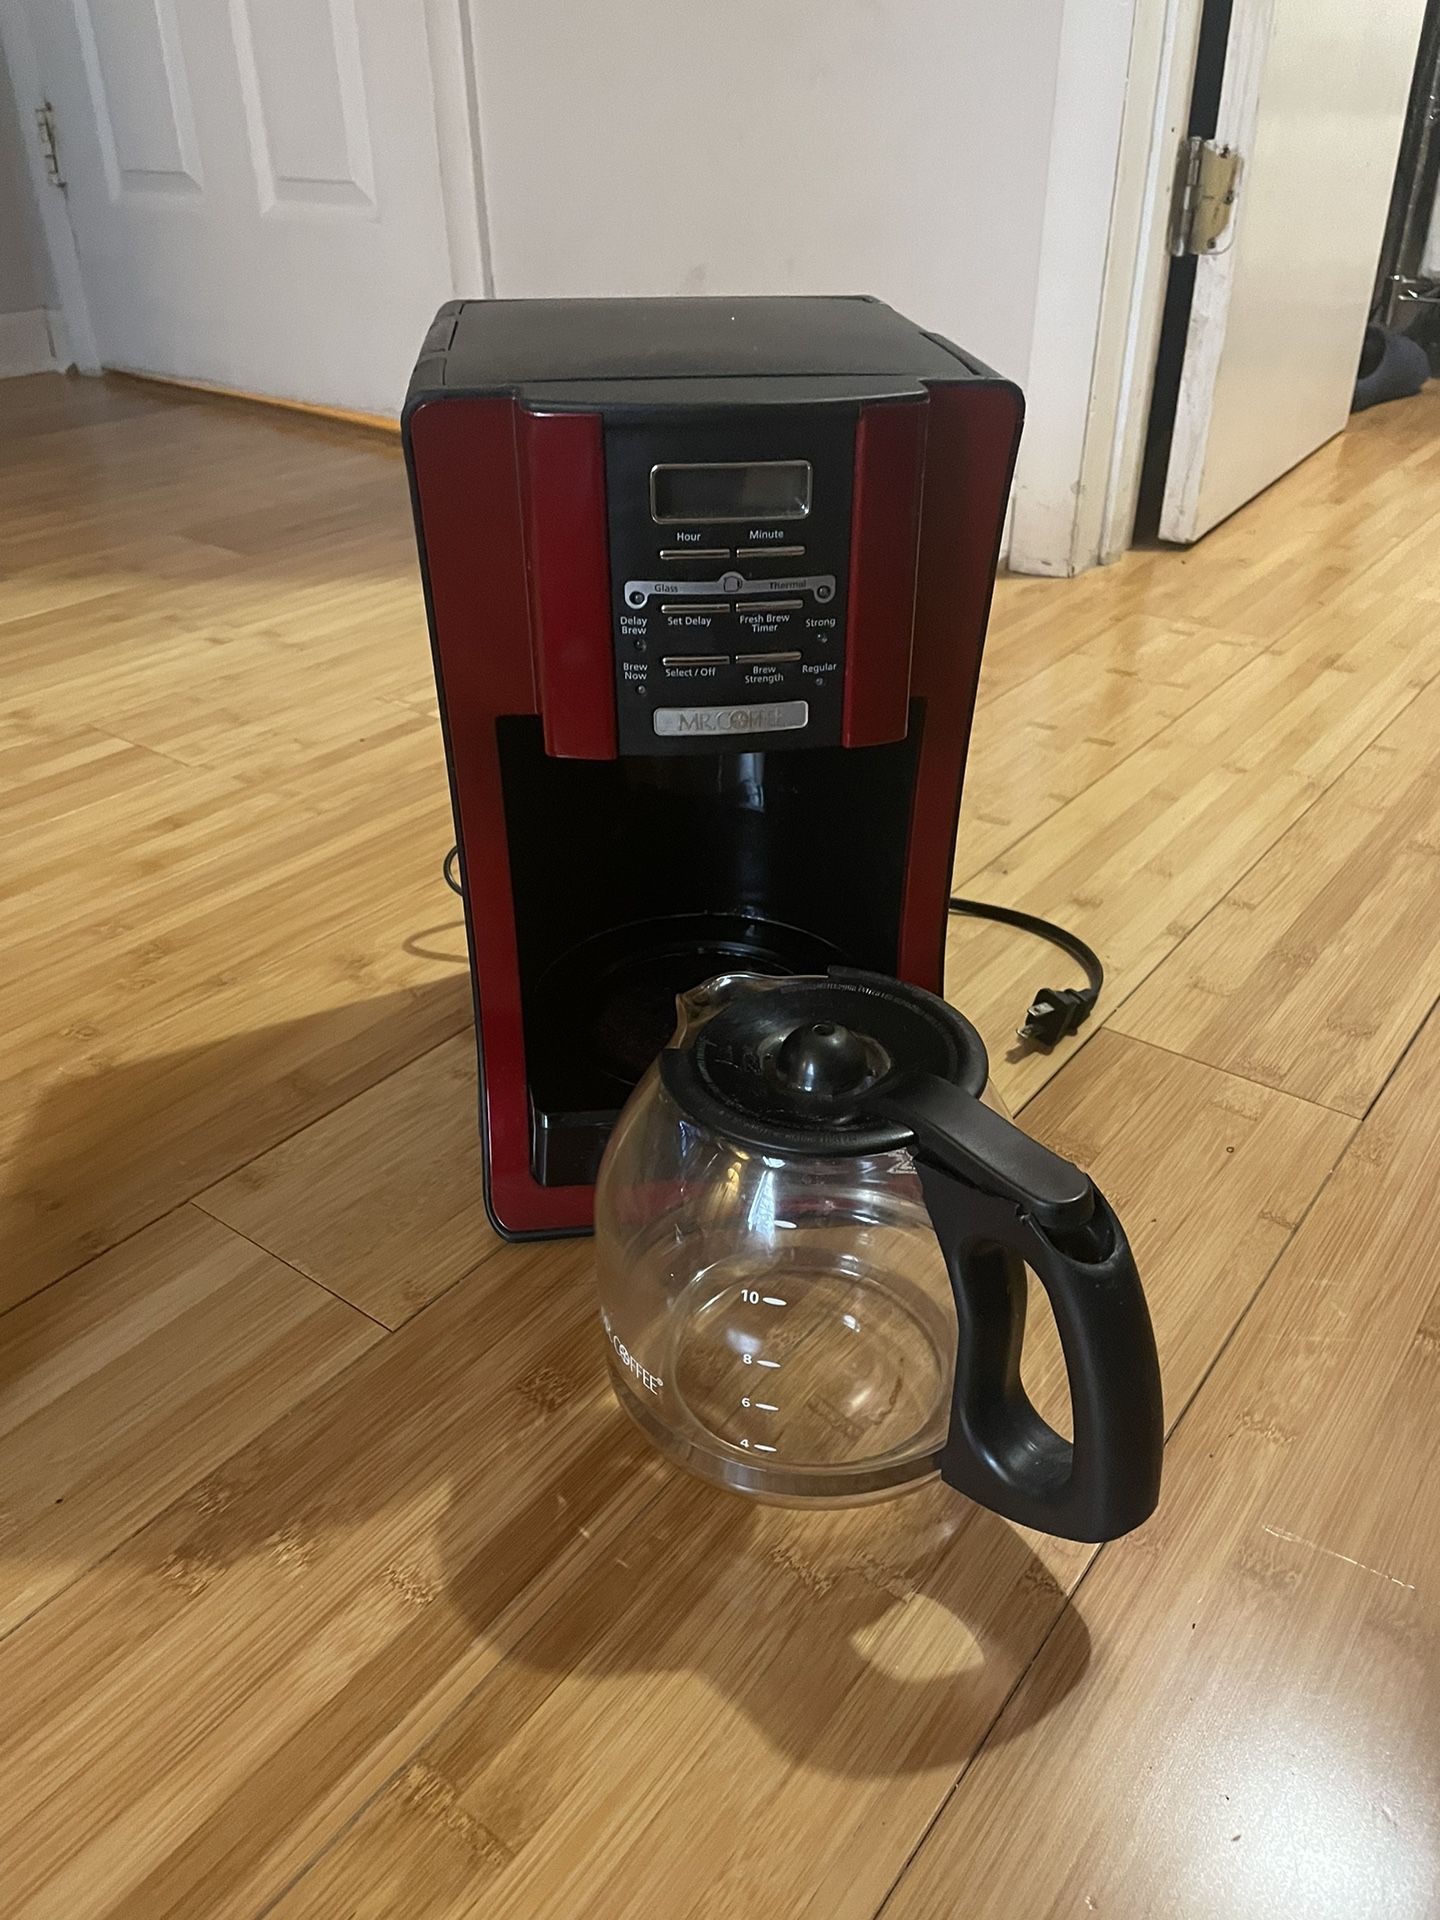 Mr. Coffee 12 Cup Coffee Maker for Sale in Chicago, IL - OfferUp